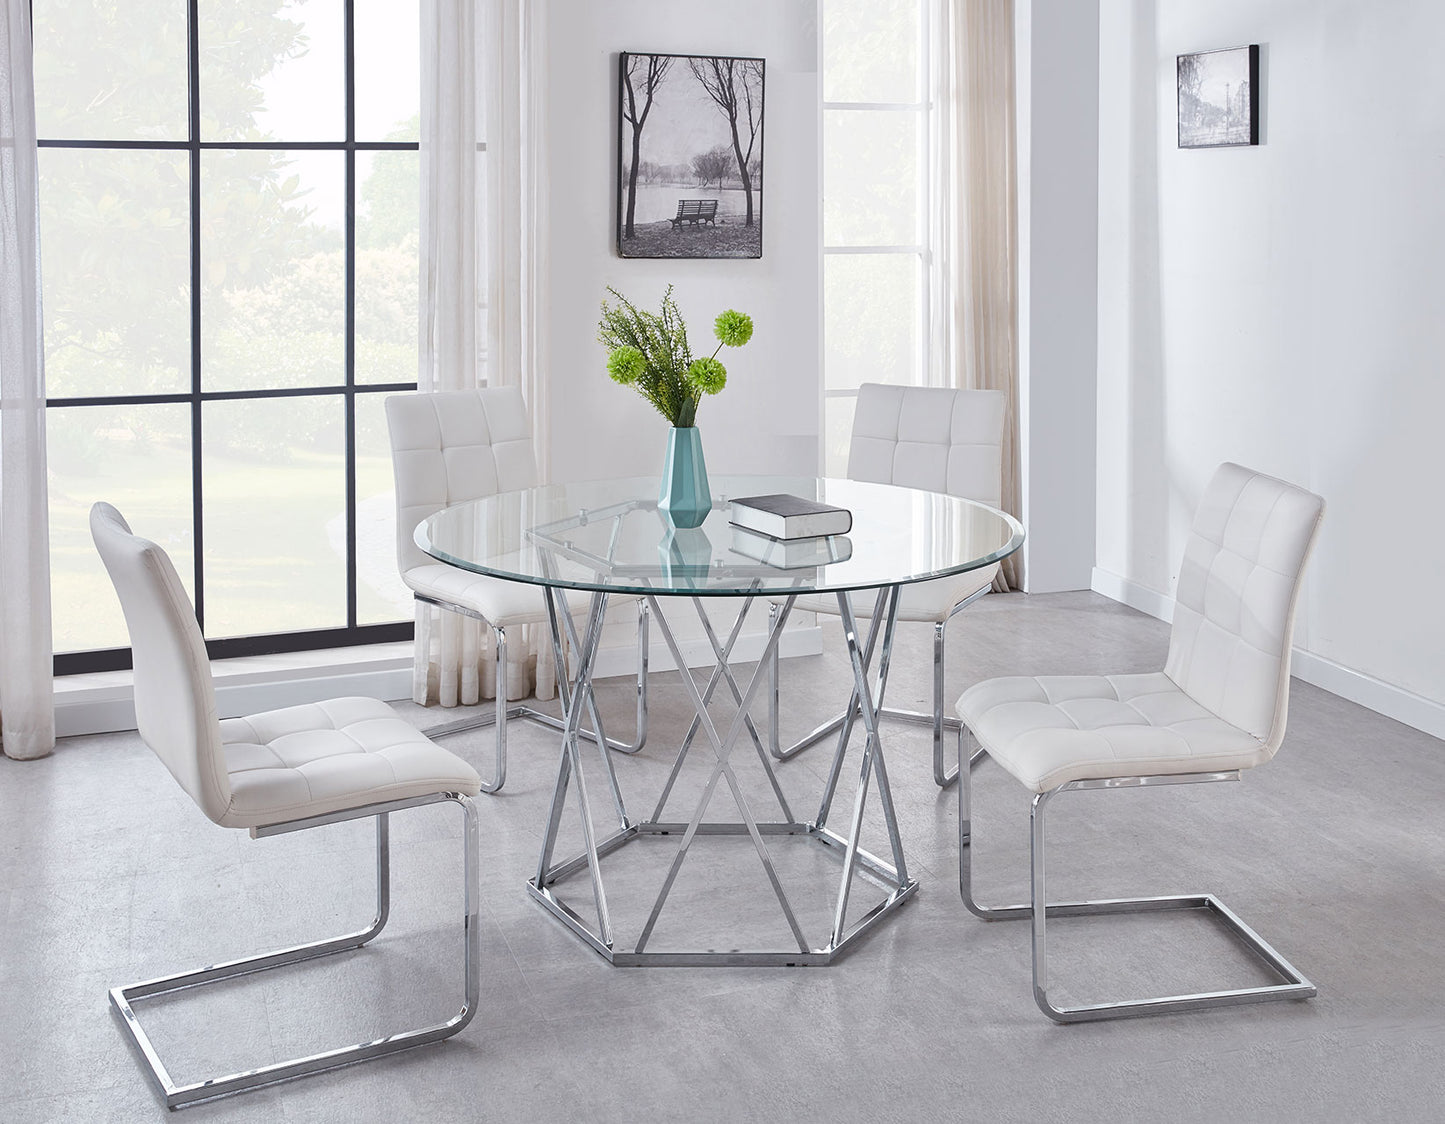 Escondido White 5 Piece Set
(Glass Top Table & 4 Side Chairs)